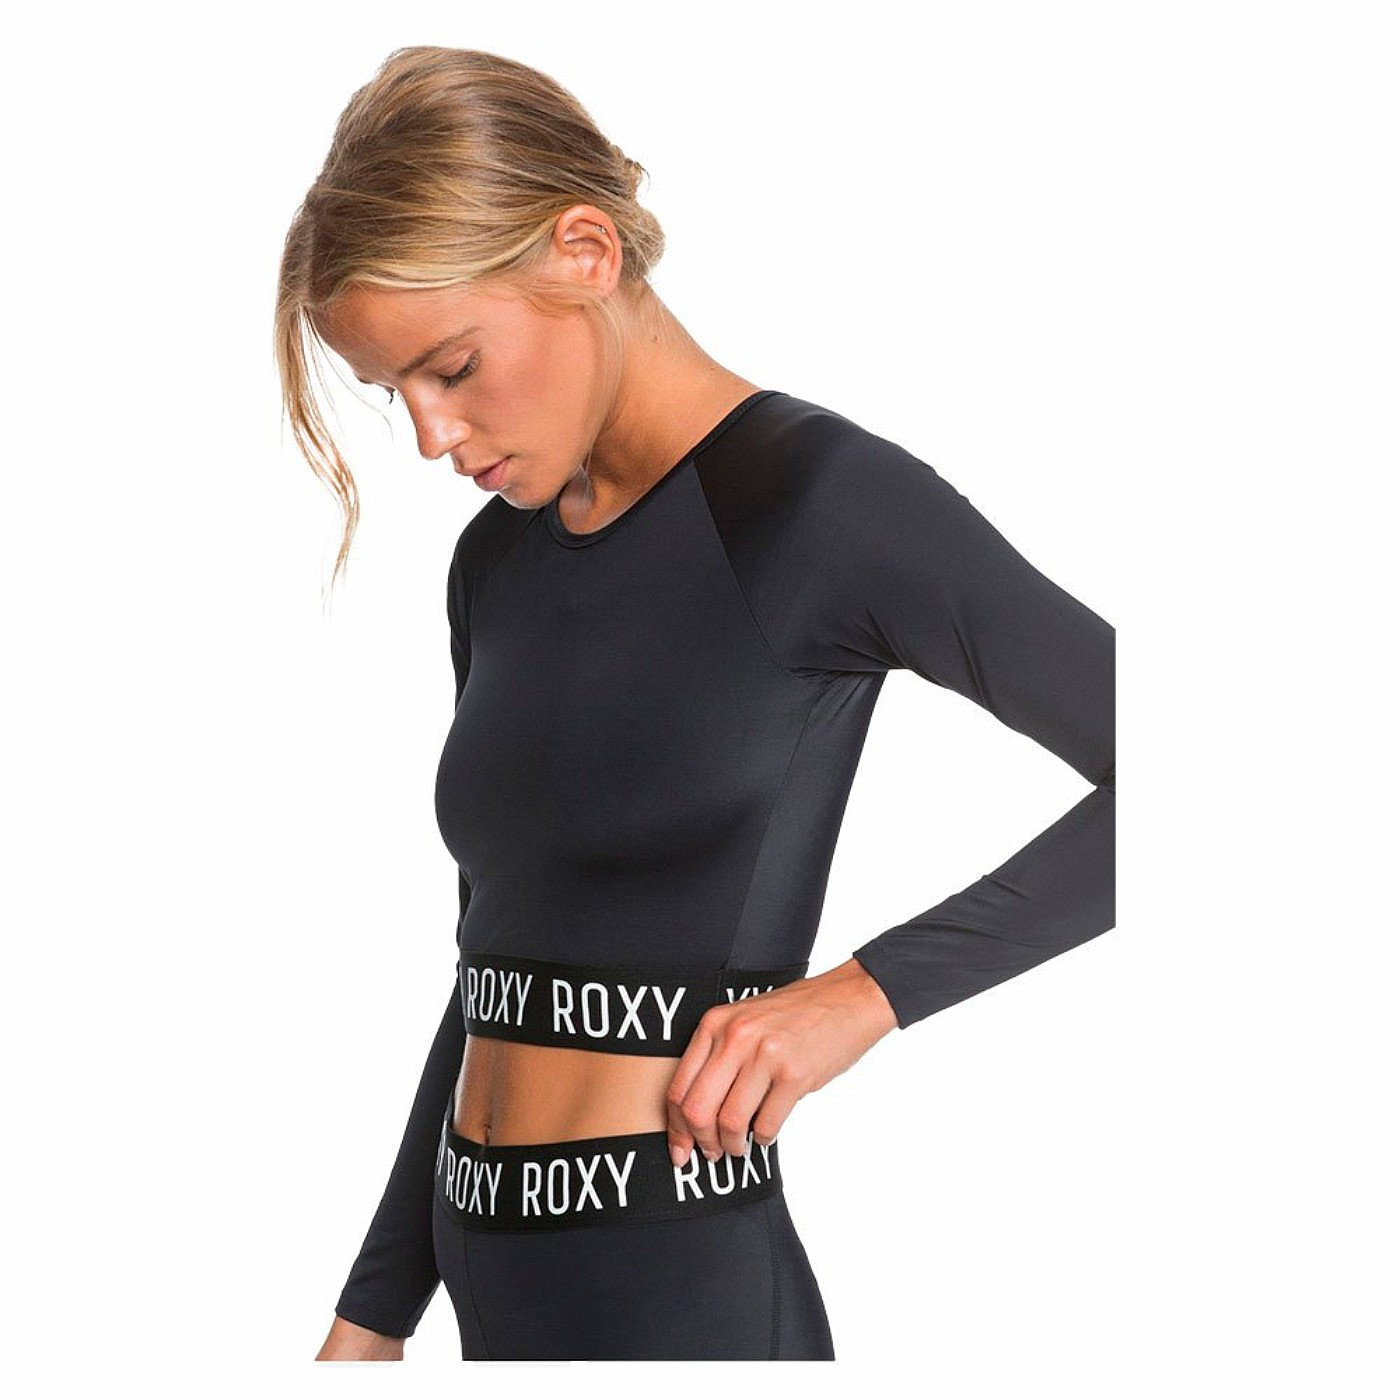 Women's top from the iconic brand ROXY | Lycra clothing for UPF 50